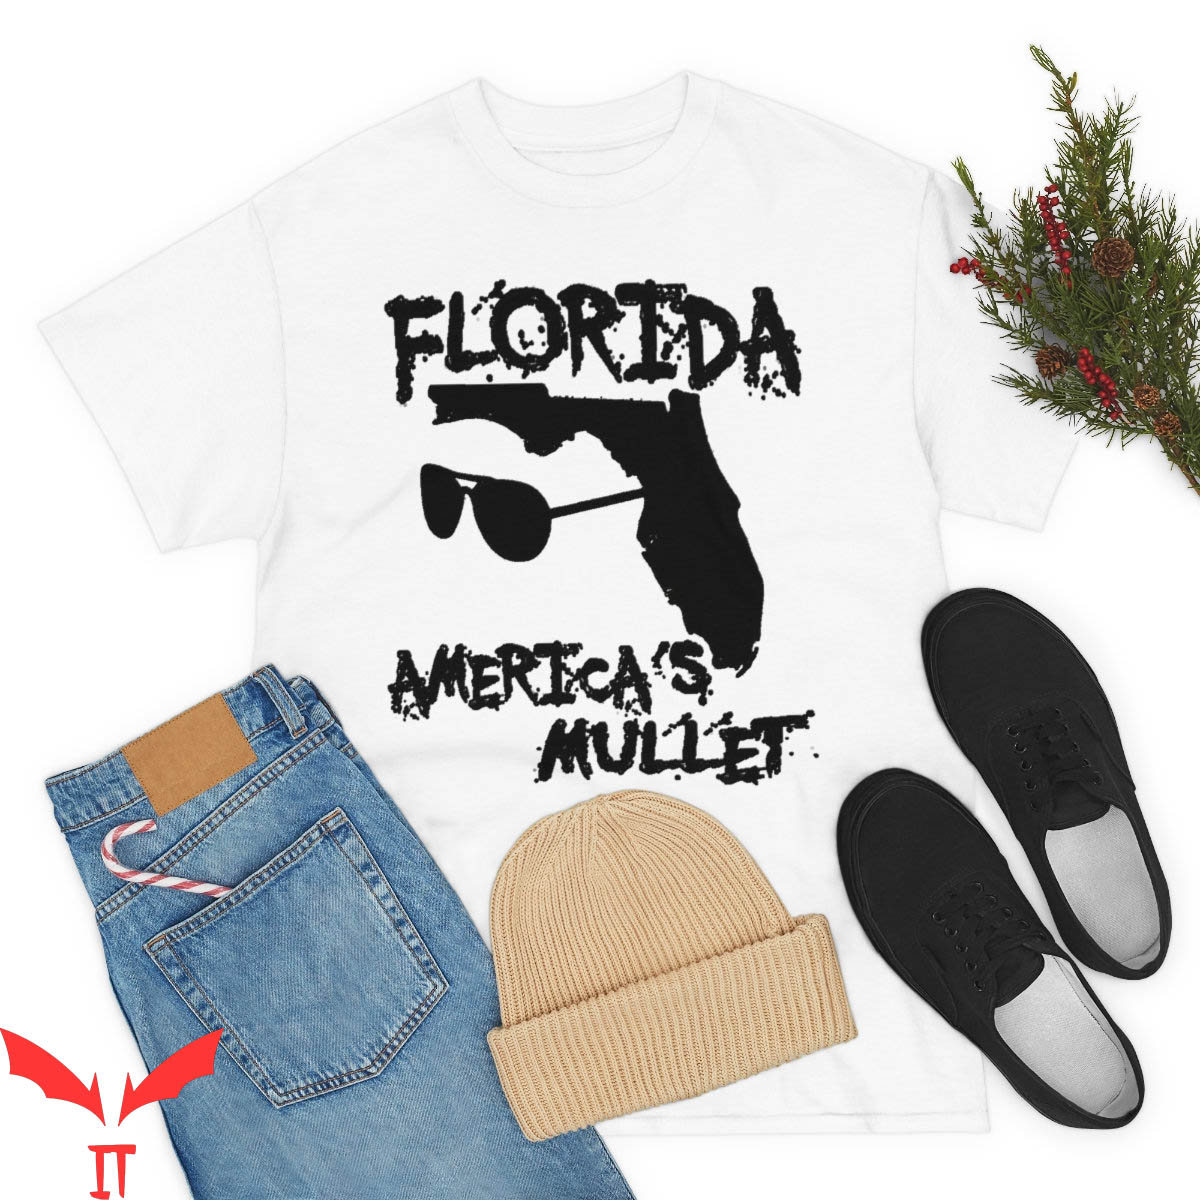 Florida Man T-Shirt Funny Florida Is America's Mullet